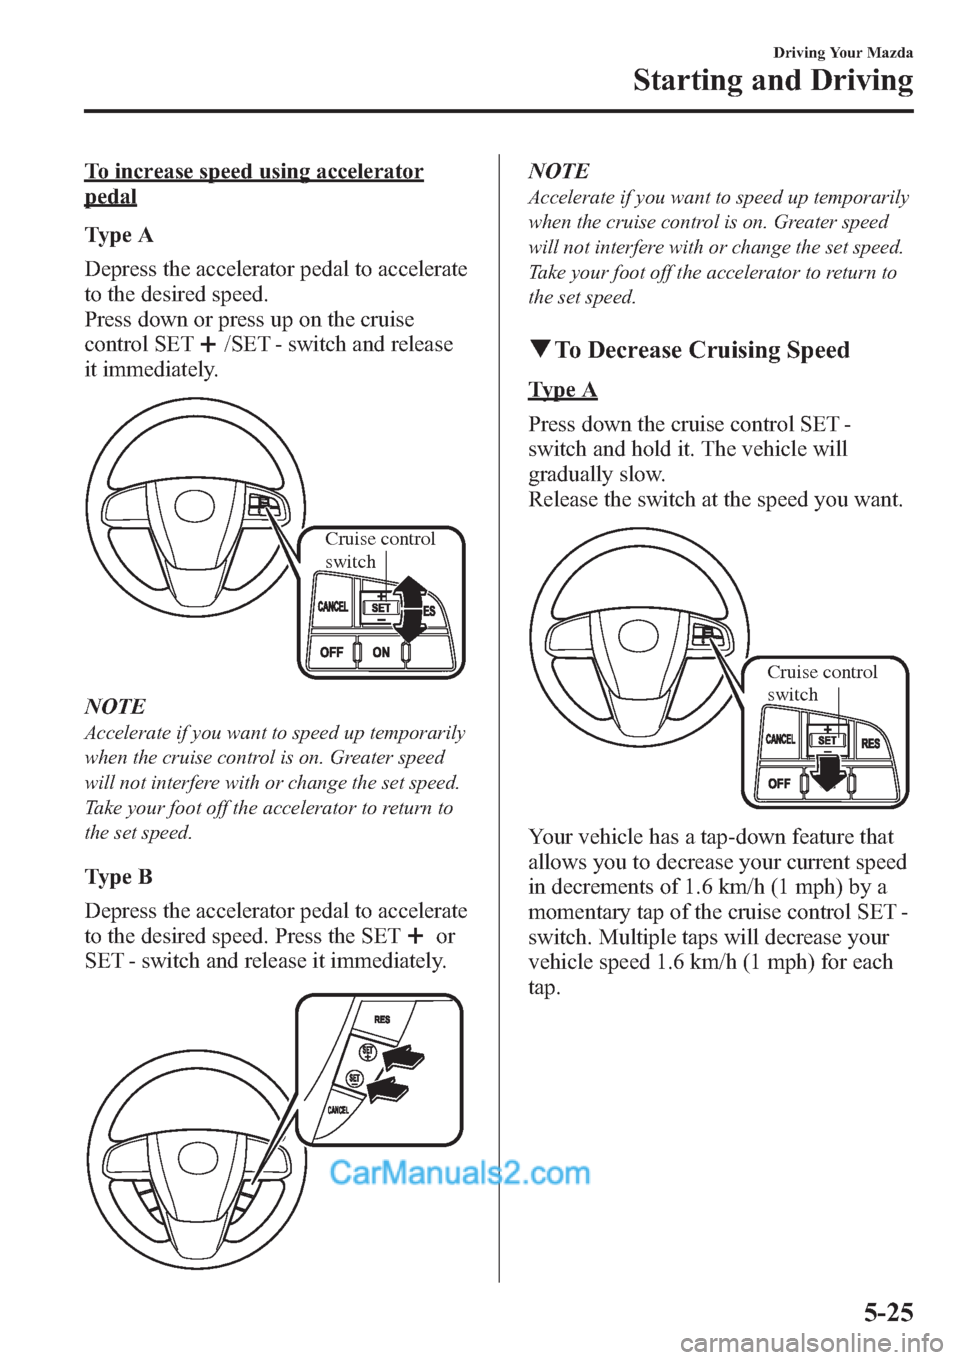 MAZDA MODEL MAZDASPEED 3 2013  Owners Manual (in English) To increase speed using accelerator
pedal
Type A
Depress the accelerator pedal to accelerate
to the desired speed.
Press down or press up on the cruise
control SET
/SET - switch and release
it immedia